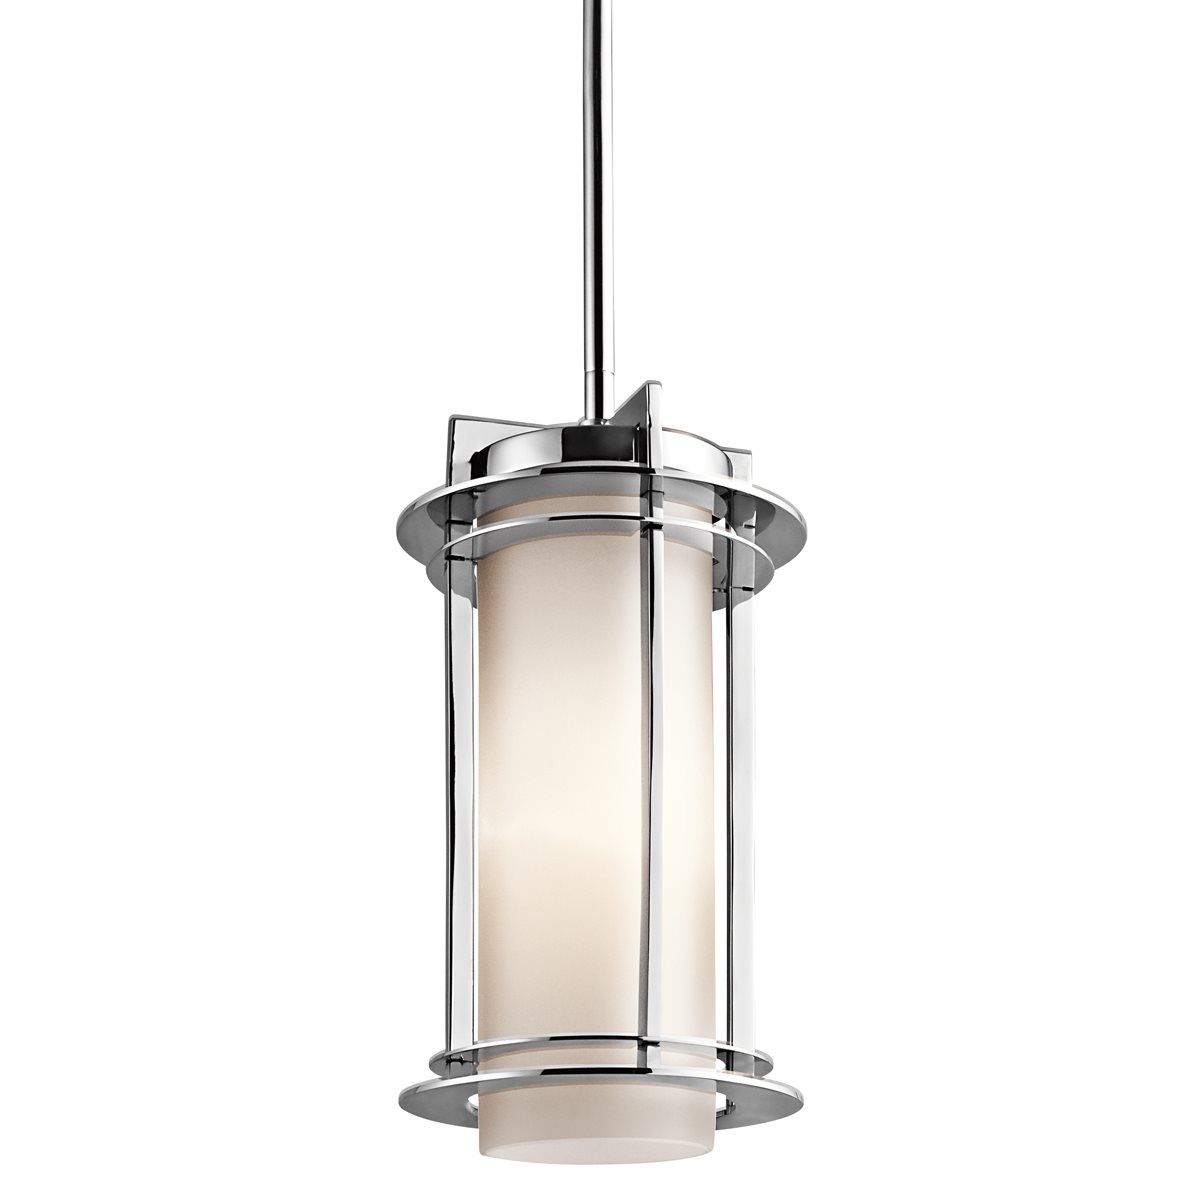 Innovative Outdoor Pendant Lights Related To Room Decorating Inside Outdoor Hanging Ceiling Lights (View 8 of 15)